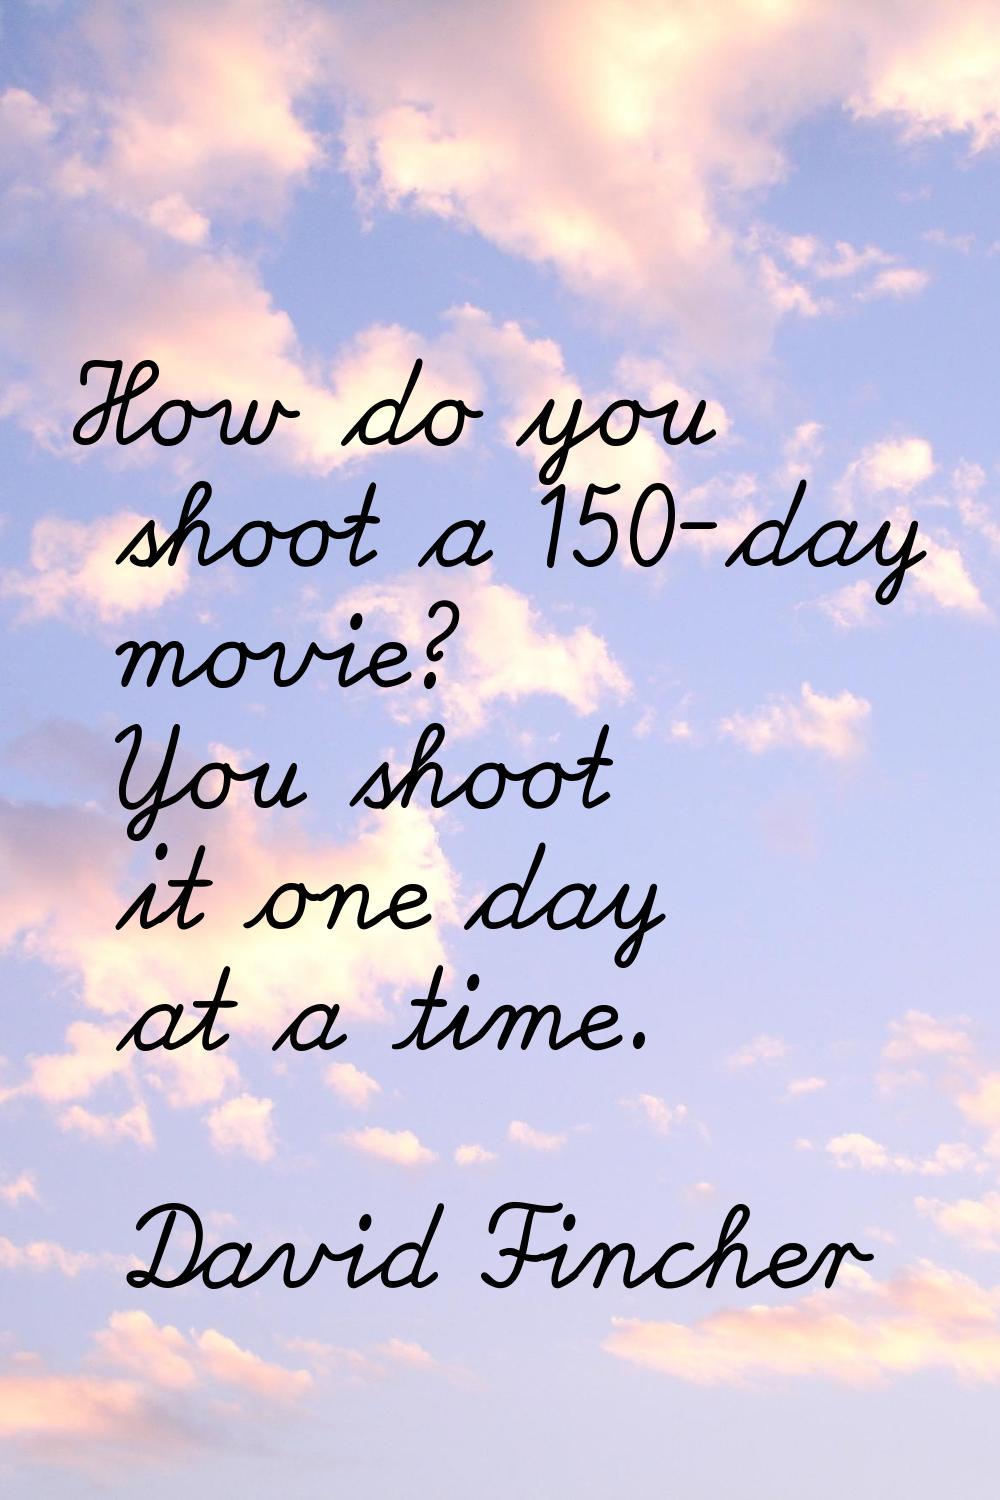 How do you shoot a 150-day movie? You shoot it one day at a time.